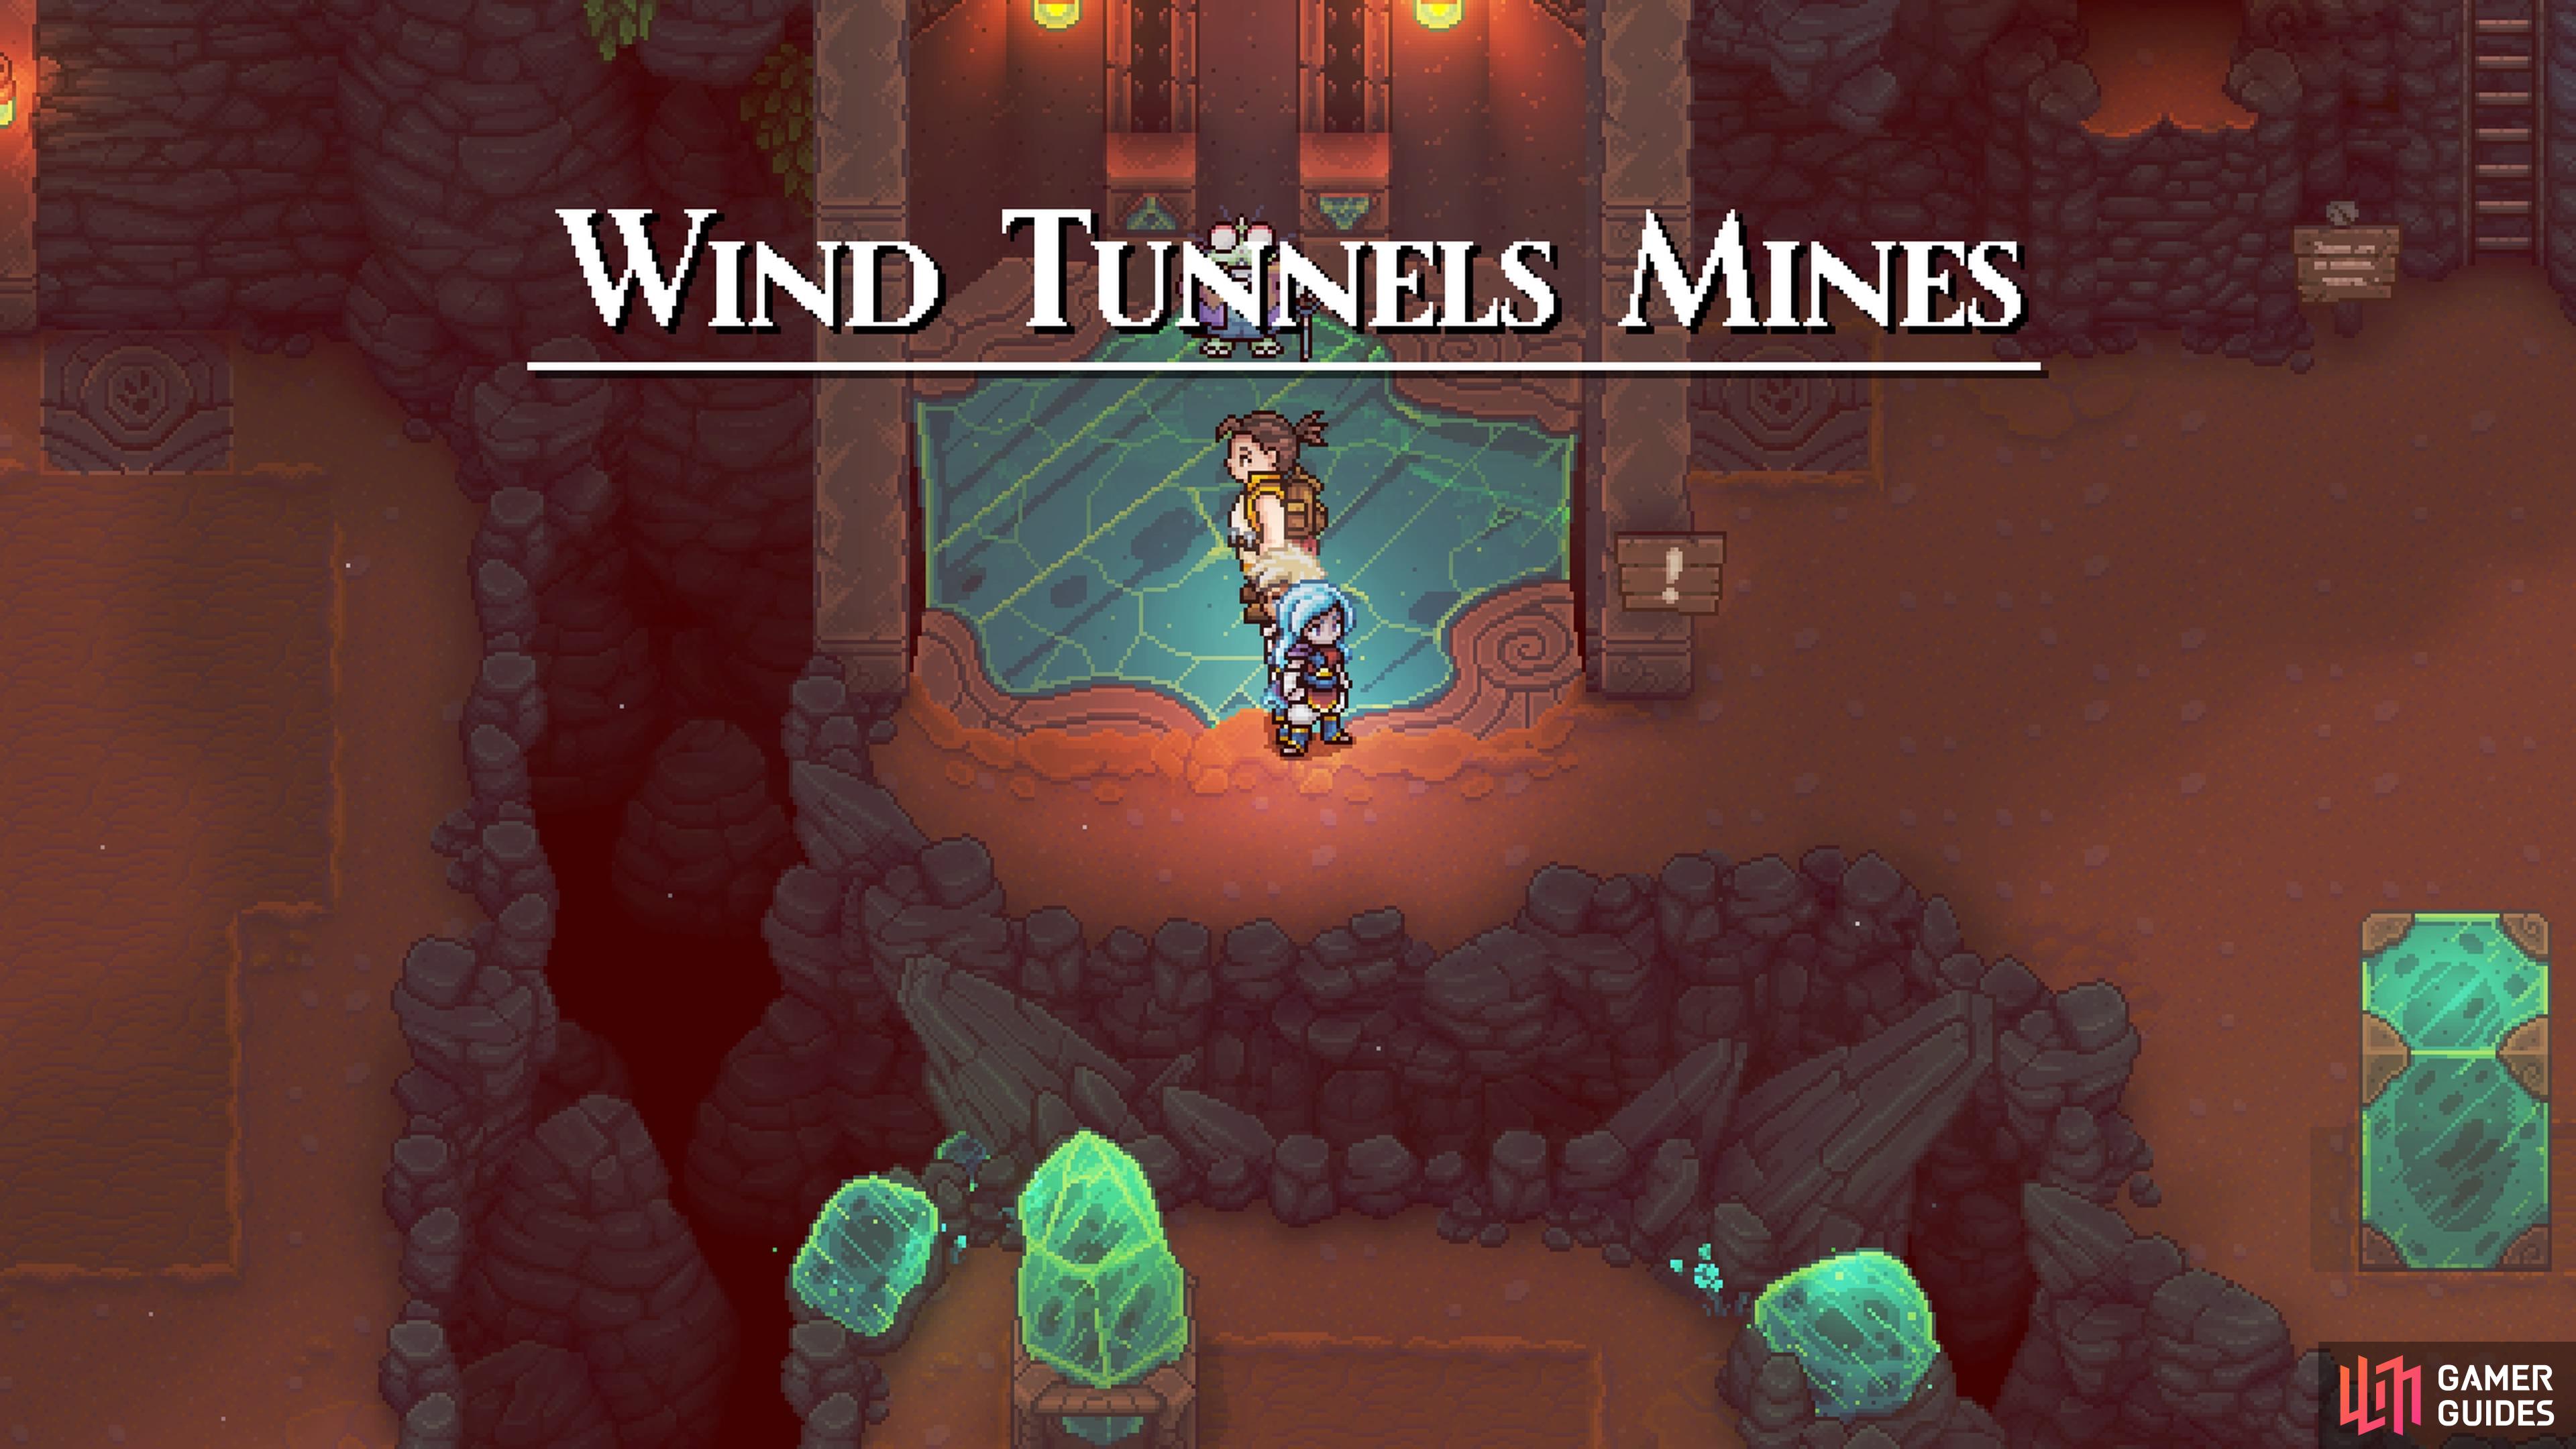 The Wind Tunnel Mines is a fairly long dungeon.